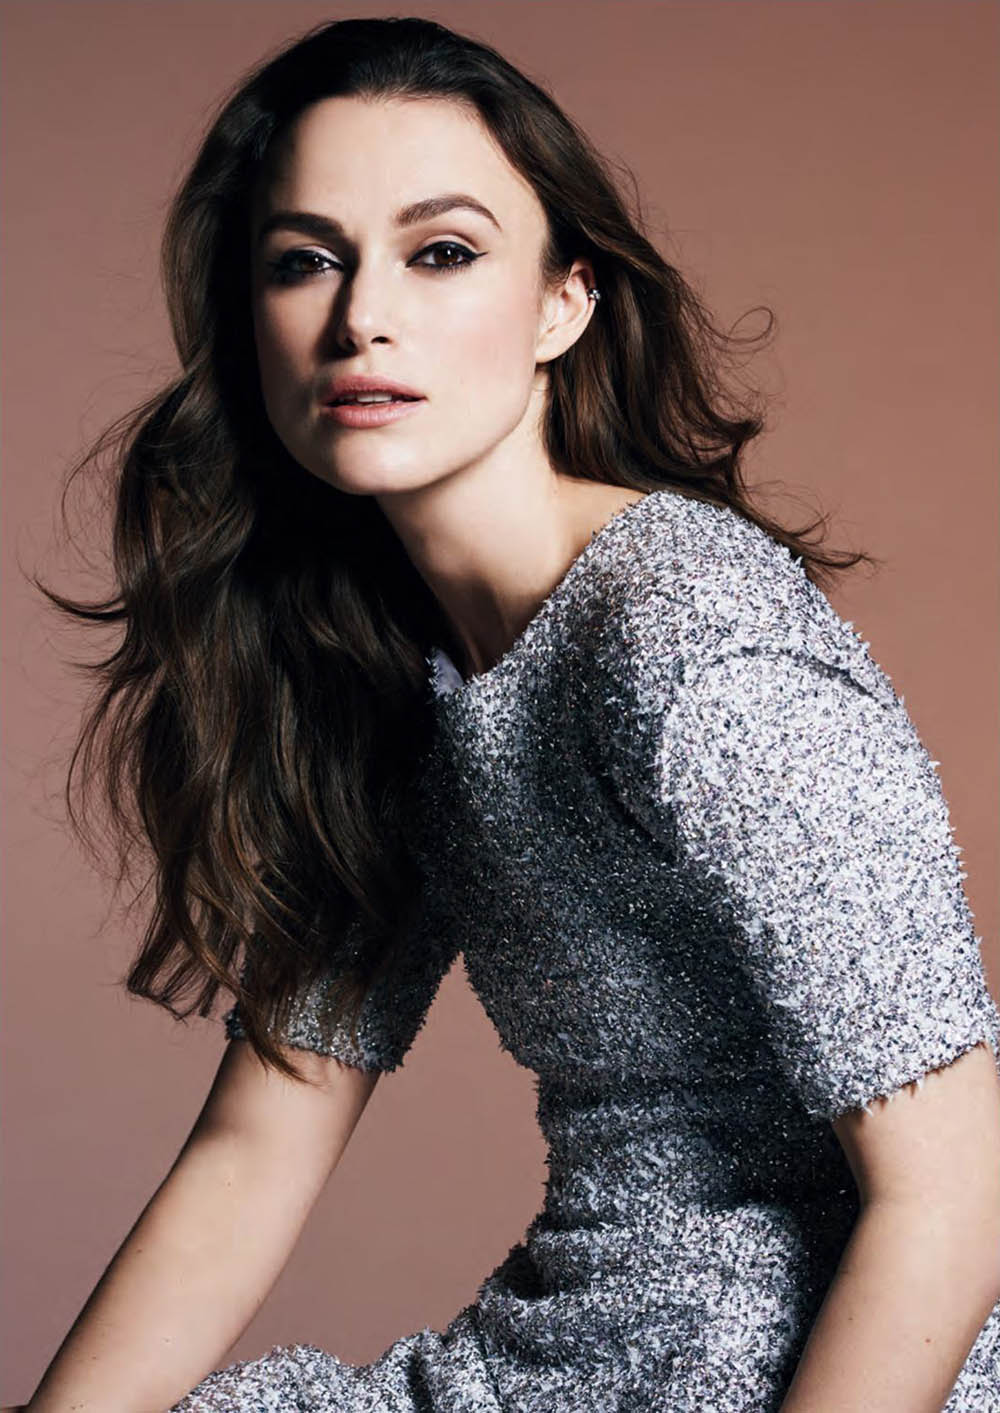 Keira Knightley covers Elle Canada April 2018 by Liz Collins